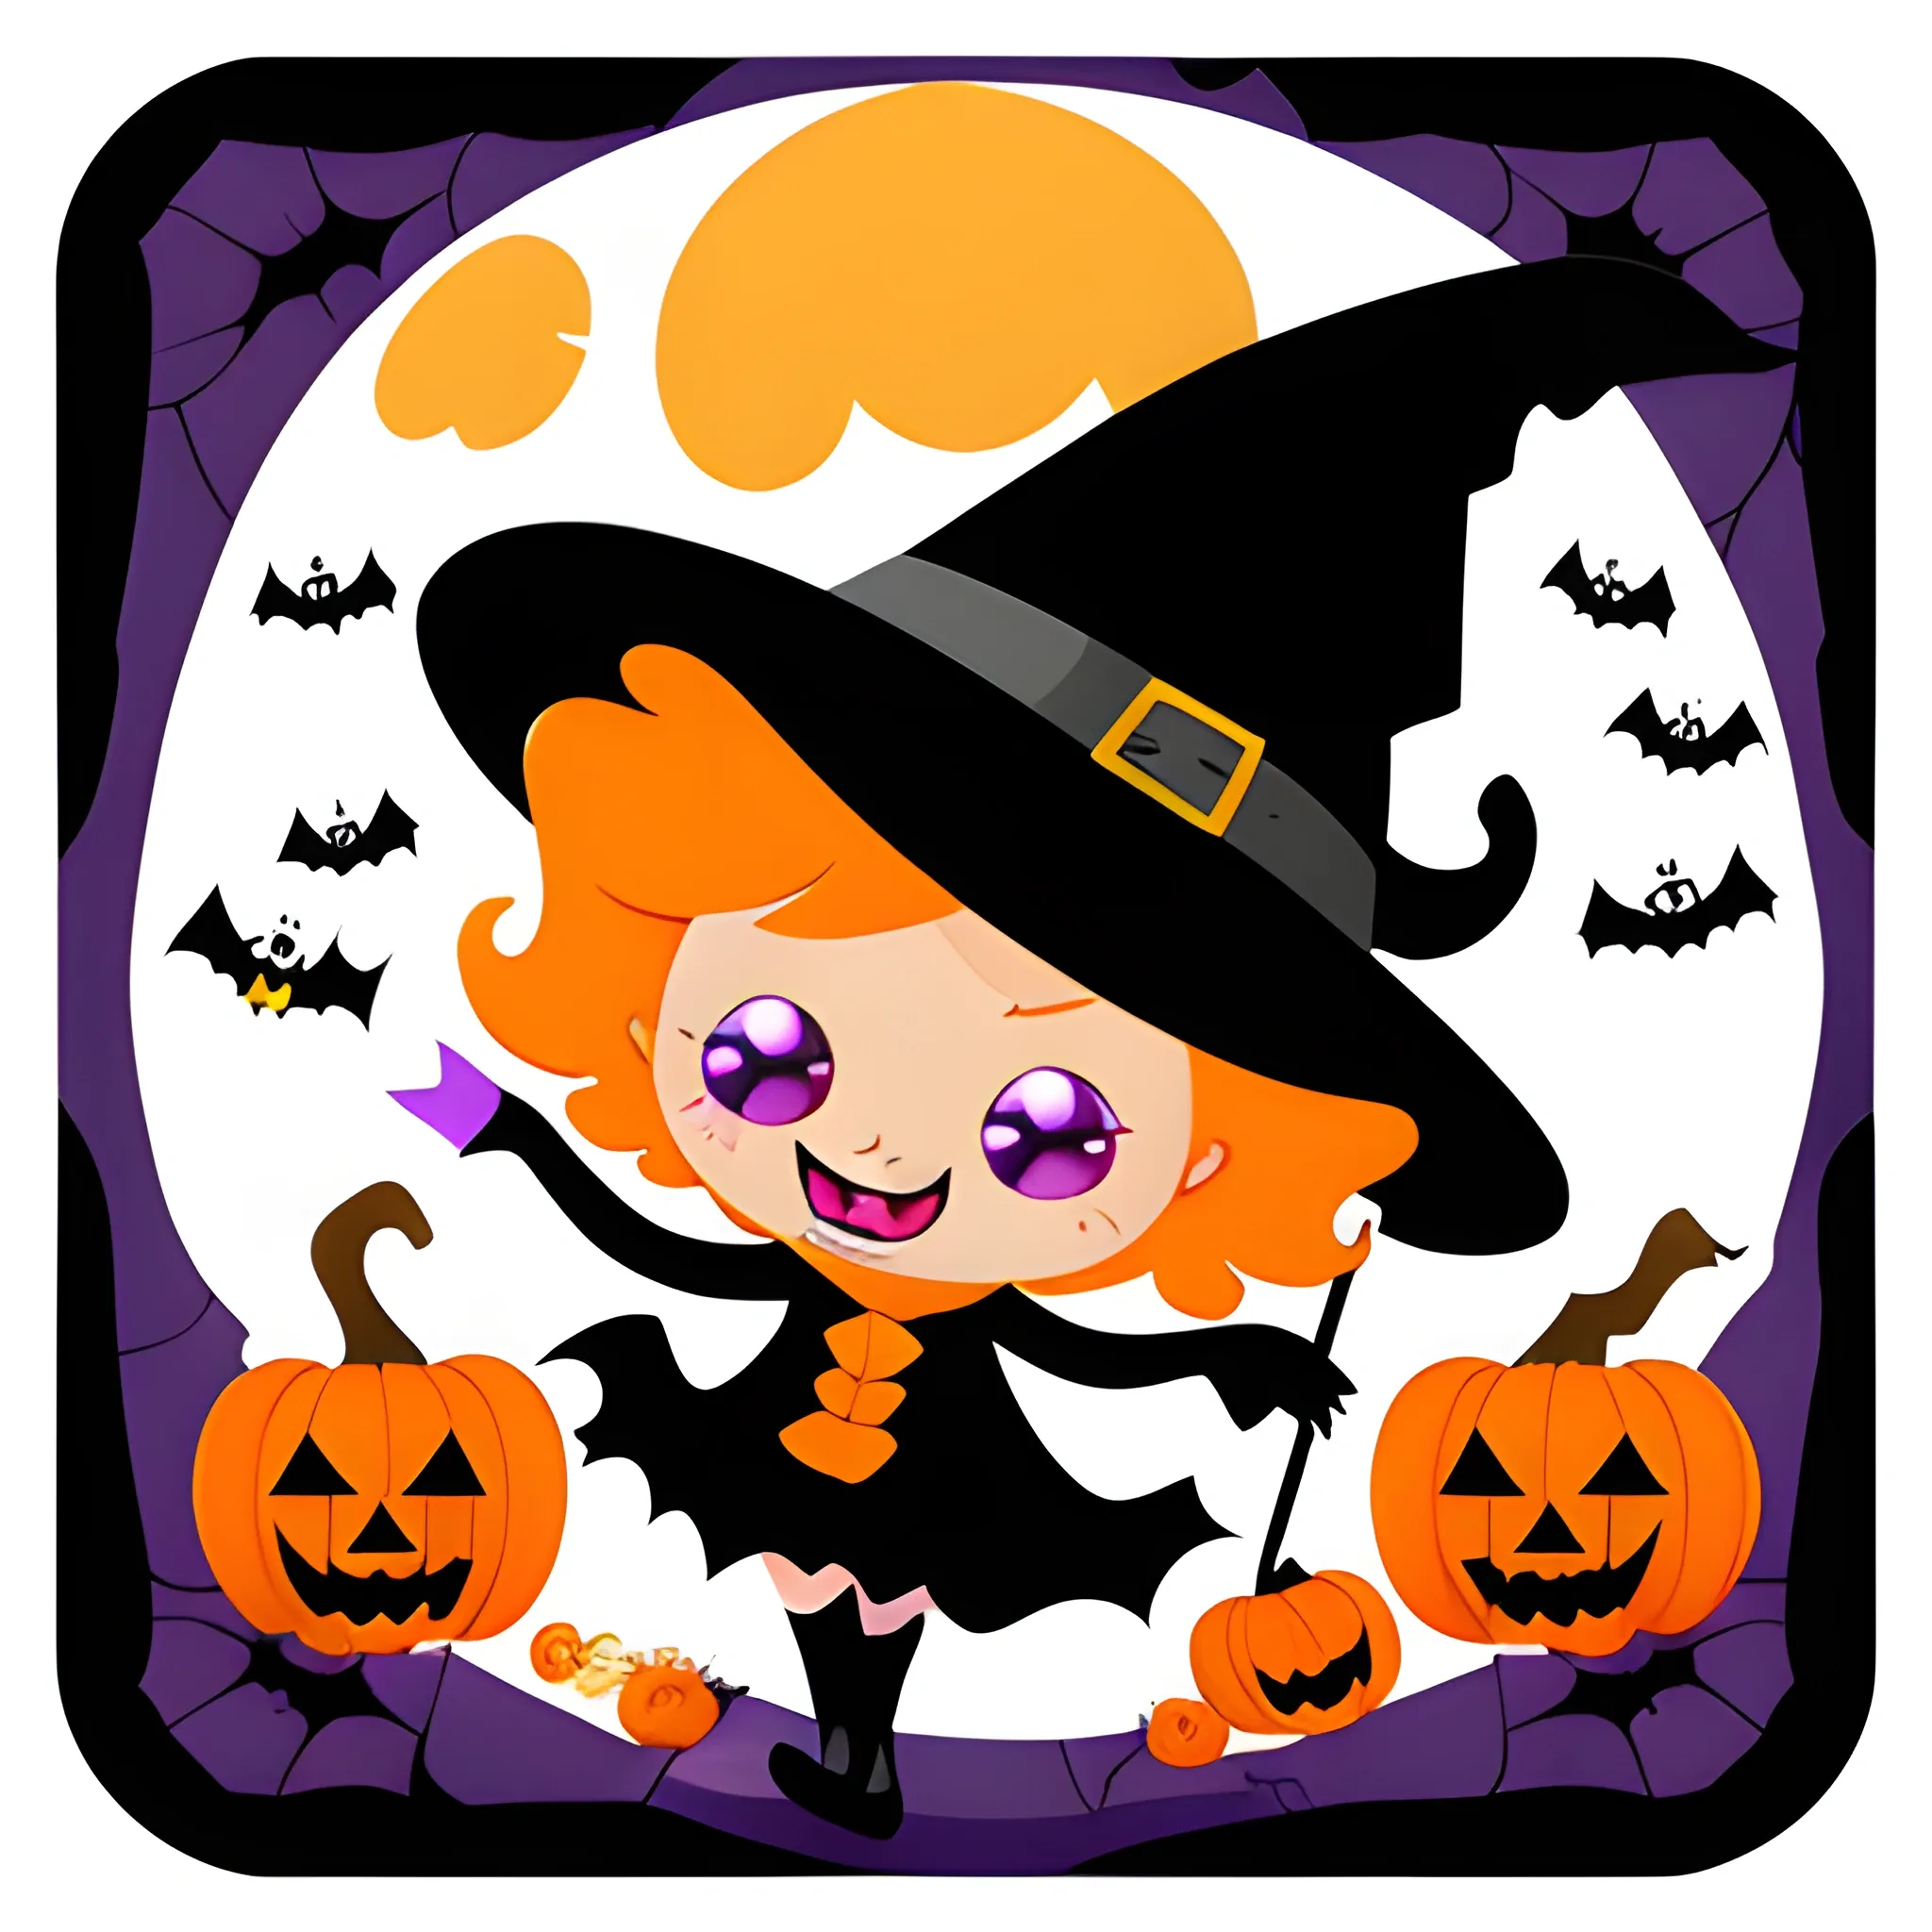 Design of funny witch sticker on Halloween, thick edges, white background, put 4 stickers separated , Cartoon